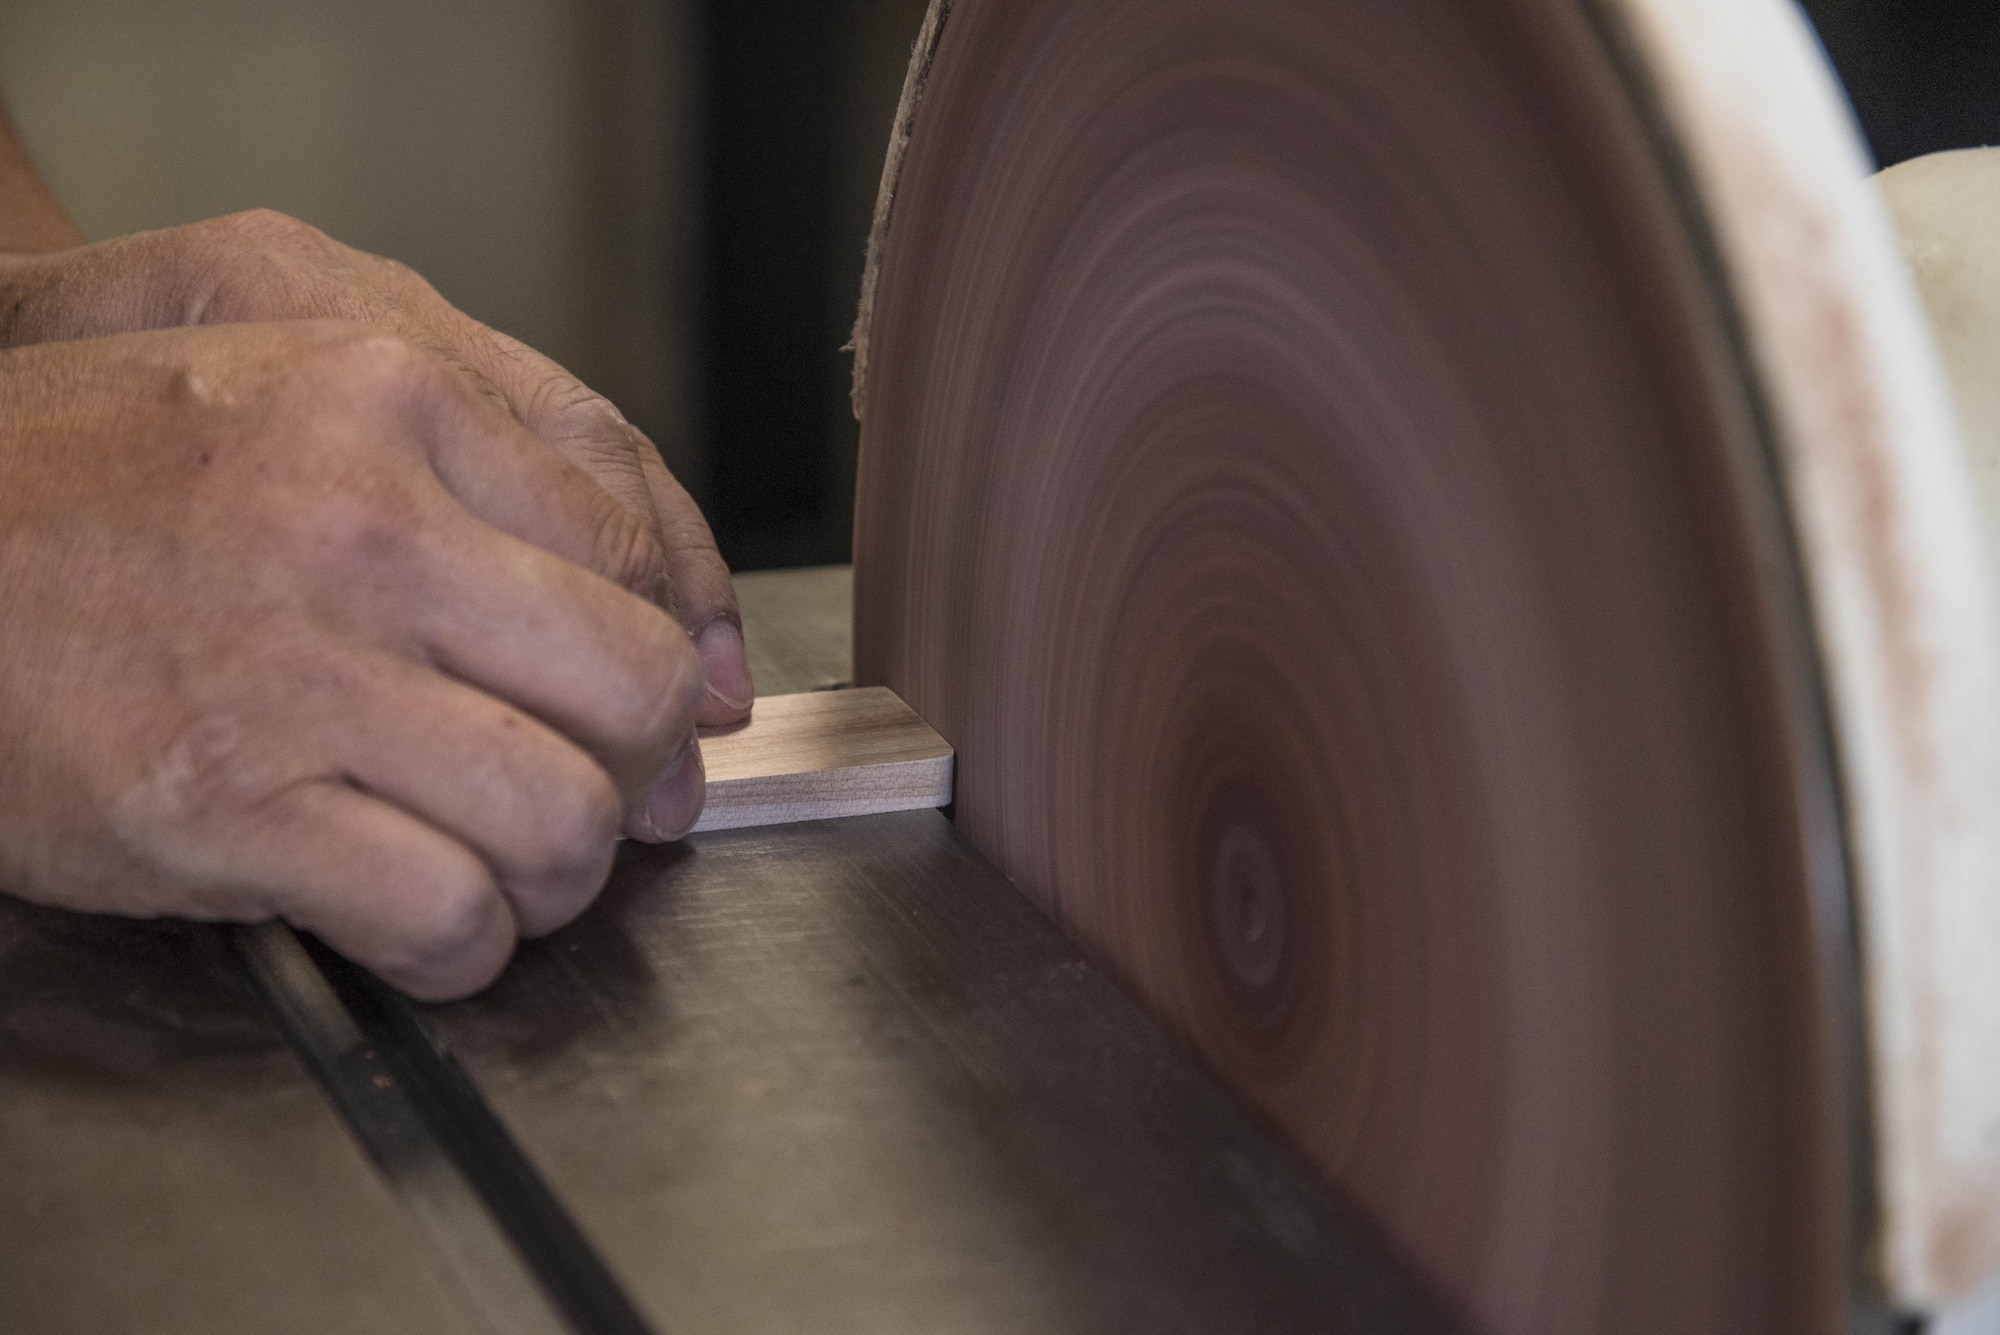 Yutaka Kashiwazaki, a 35th Force Support Squadron woodshop master laborer, uses a circular sander to smooth a detail wood piece in the woodshop at Misawa Air Base, Japan, Aug. 1, 2017. Kashiwazaki has more than 30 years of experience in woodworking and teaches others how to properly determine and use power tools for their projects. (U.S. Air Force Airman 1st Class Sadie Colbert)